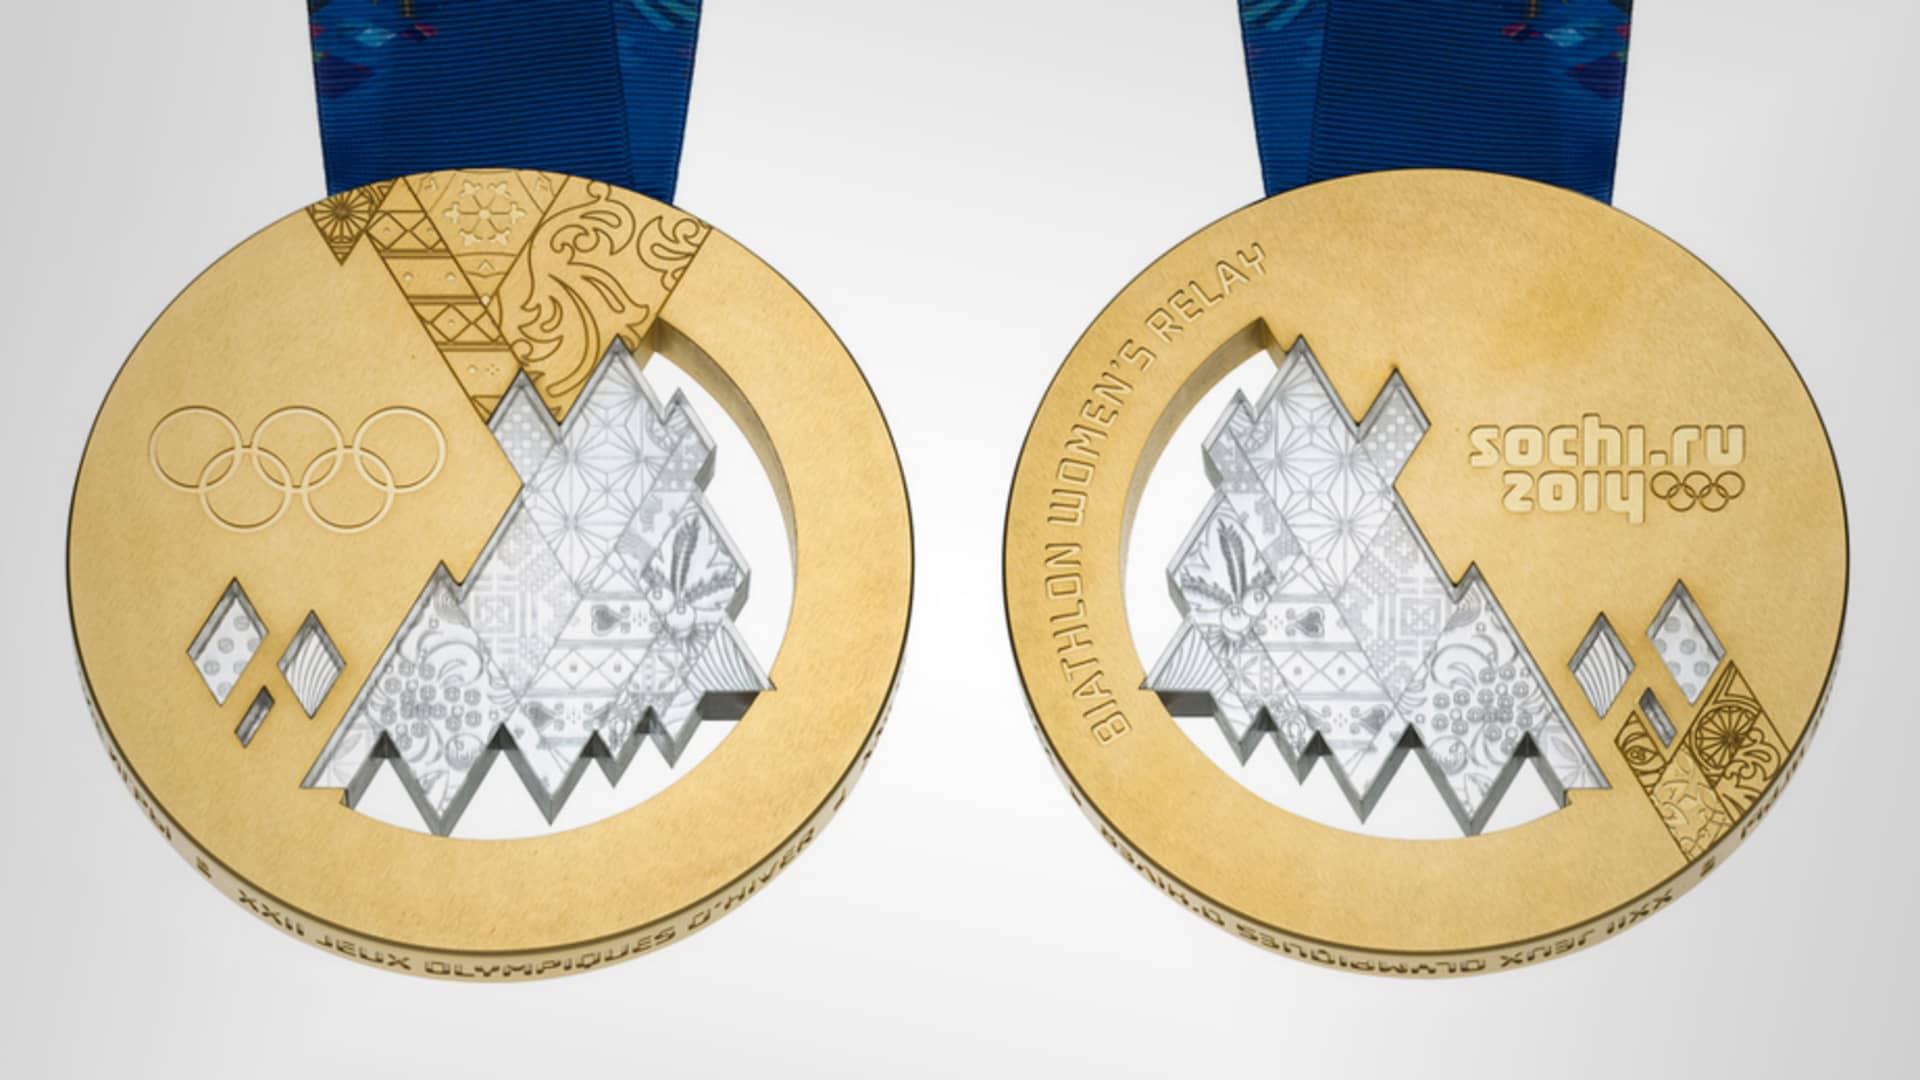 Olympic memorabilia: Medals' gold is not as important as medals' history